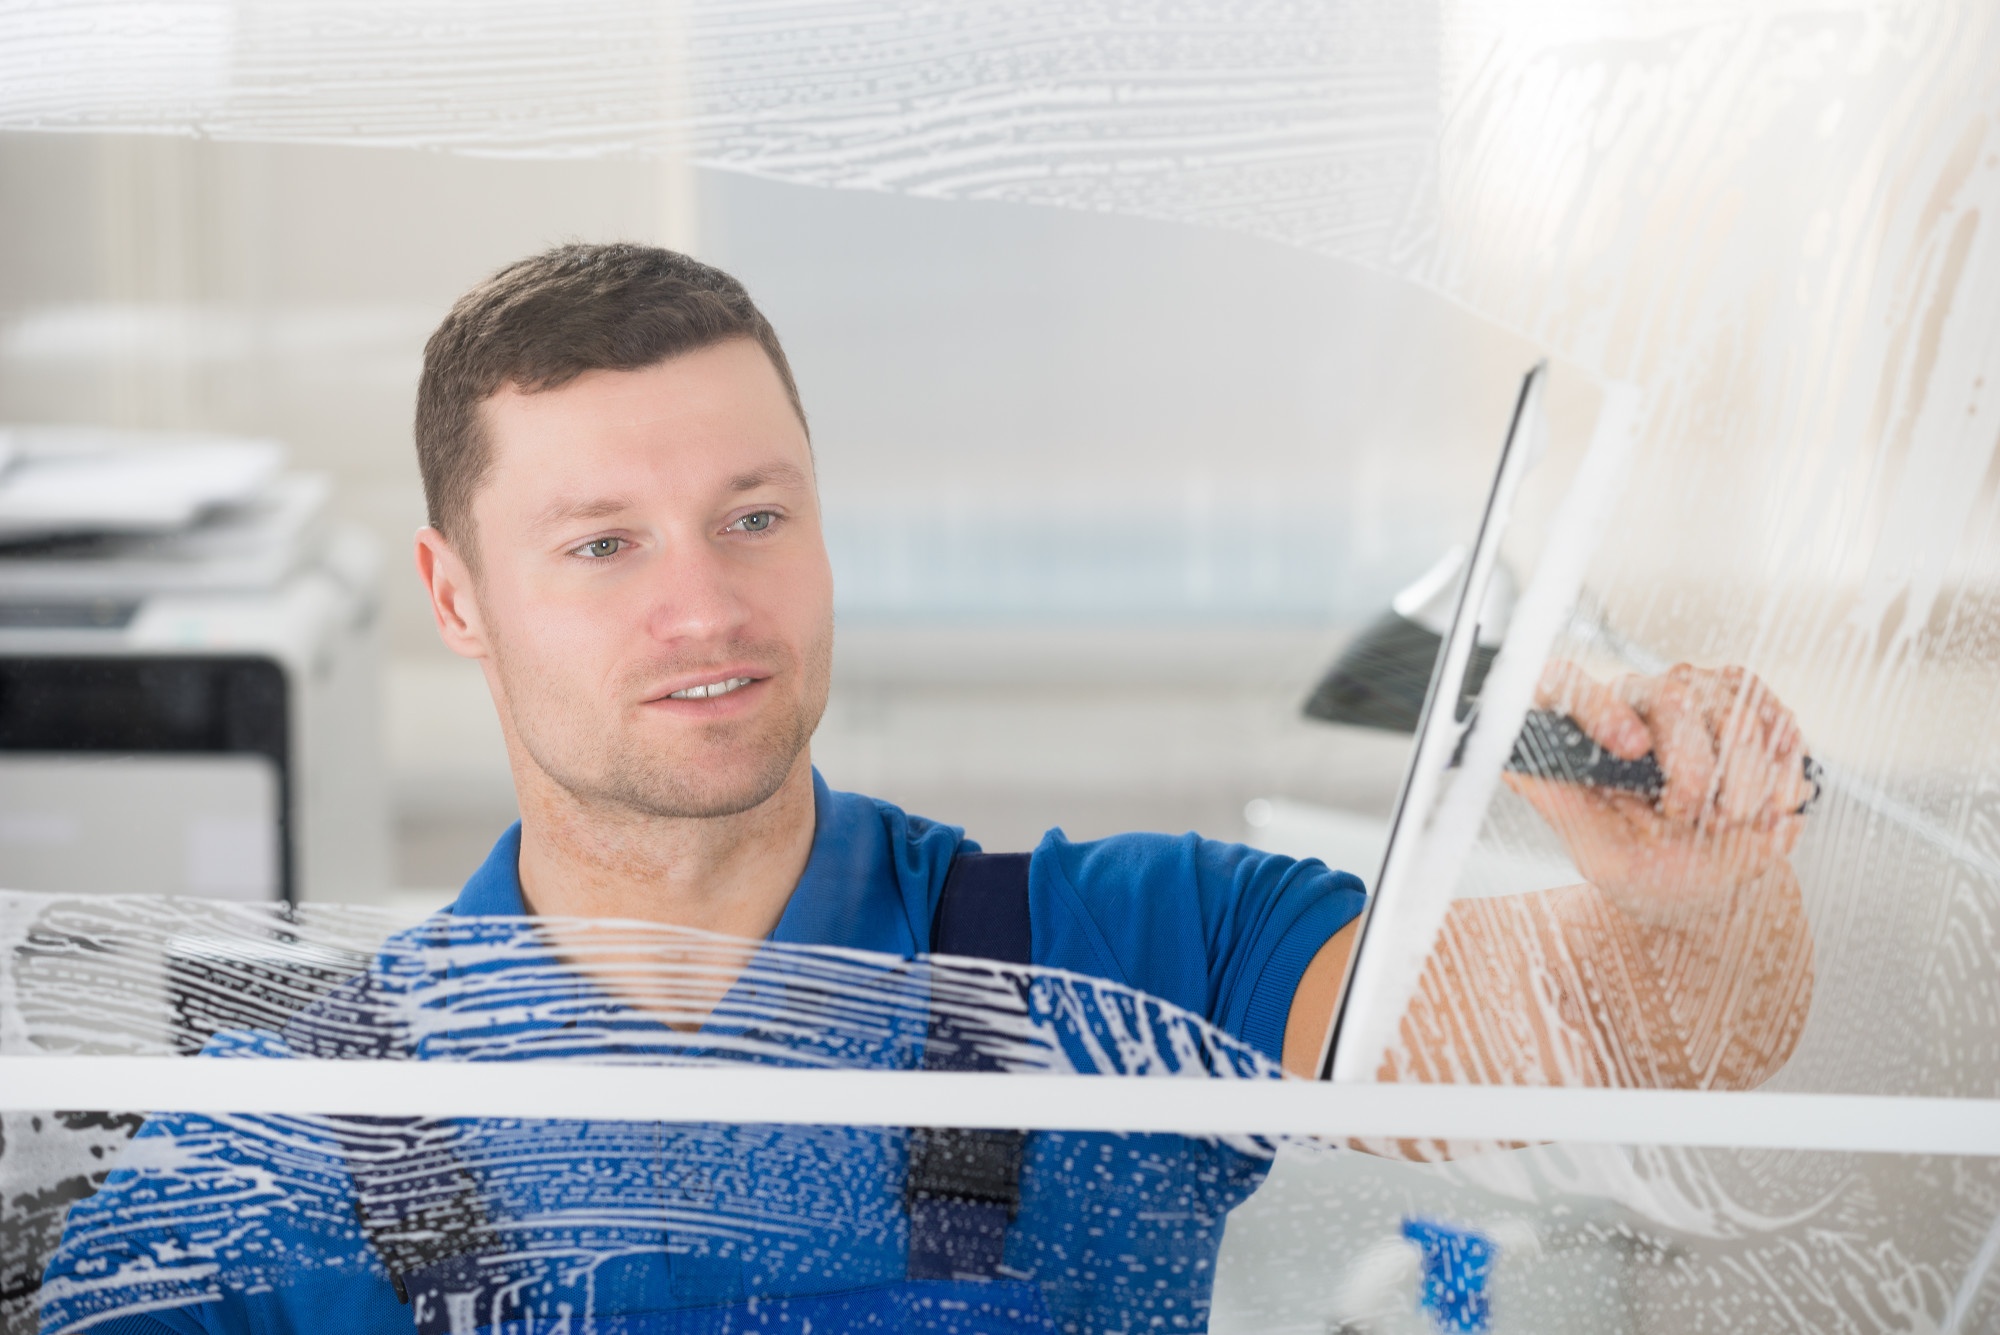 Is Getting Your Windows Professionally Cleaned Worth the Money?